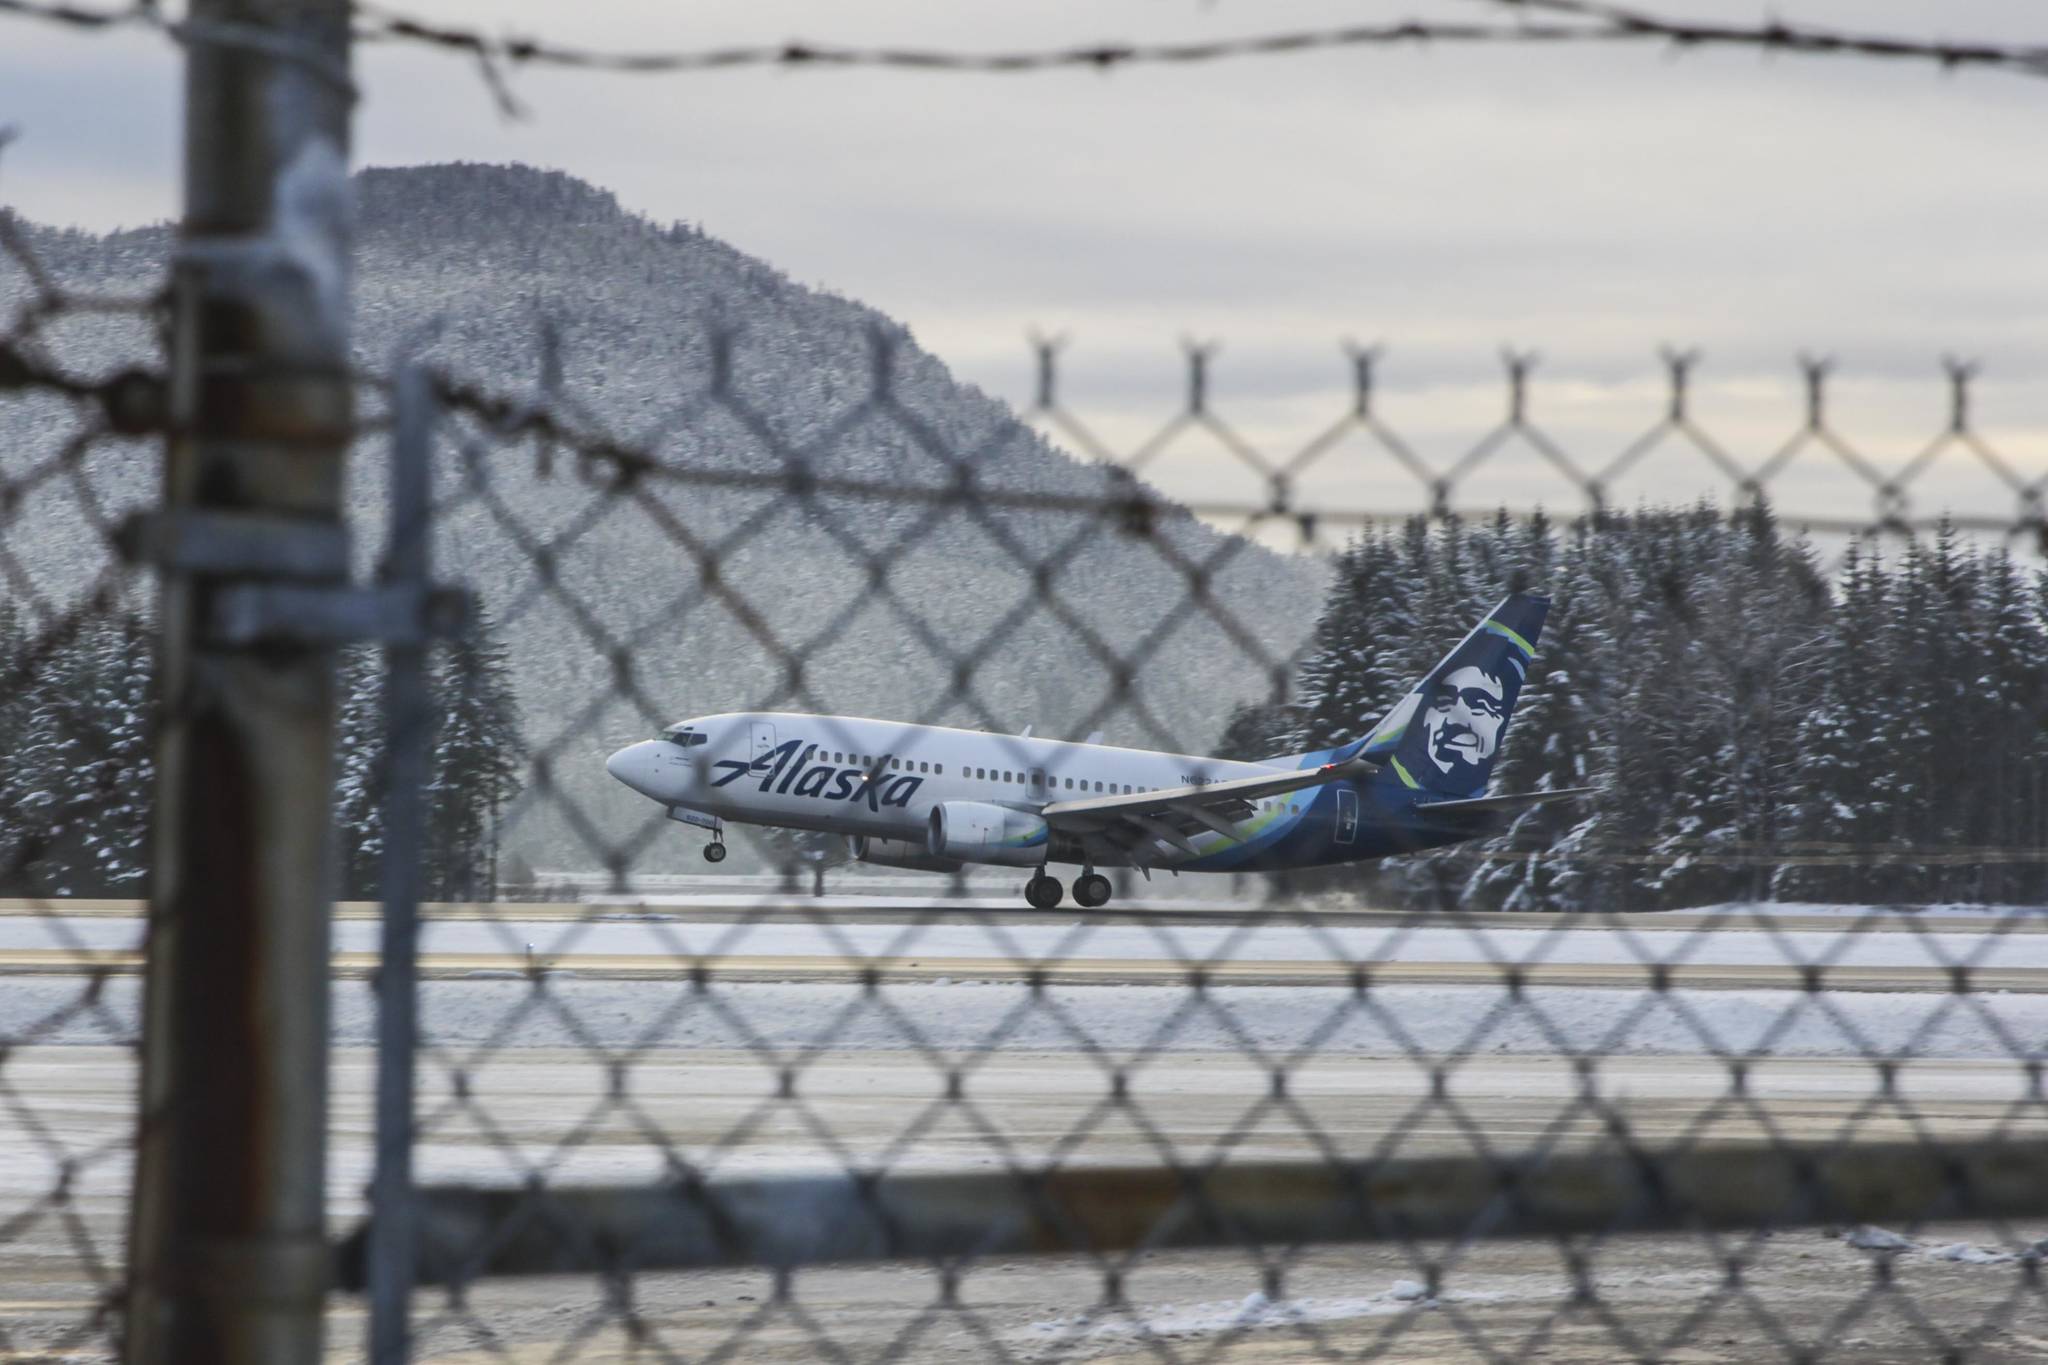 An Alaska Airlines flight transported the first shipment of the coronavirus vaccine from Anchorage to Juneau International Airport on Dec. 15, 2020, where it was transported by UPS to Bartlett Regional Hospital. BRH immediately began vaccinating its personnel. (Michael S. Lockett / Juneau Empire)